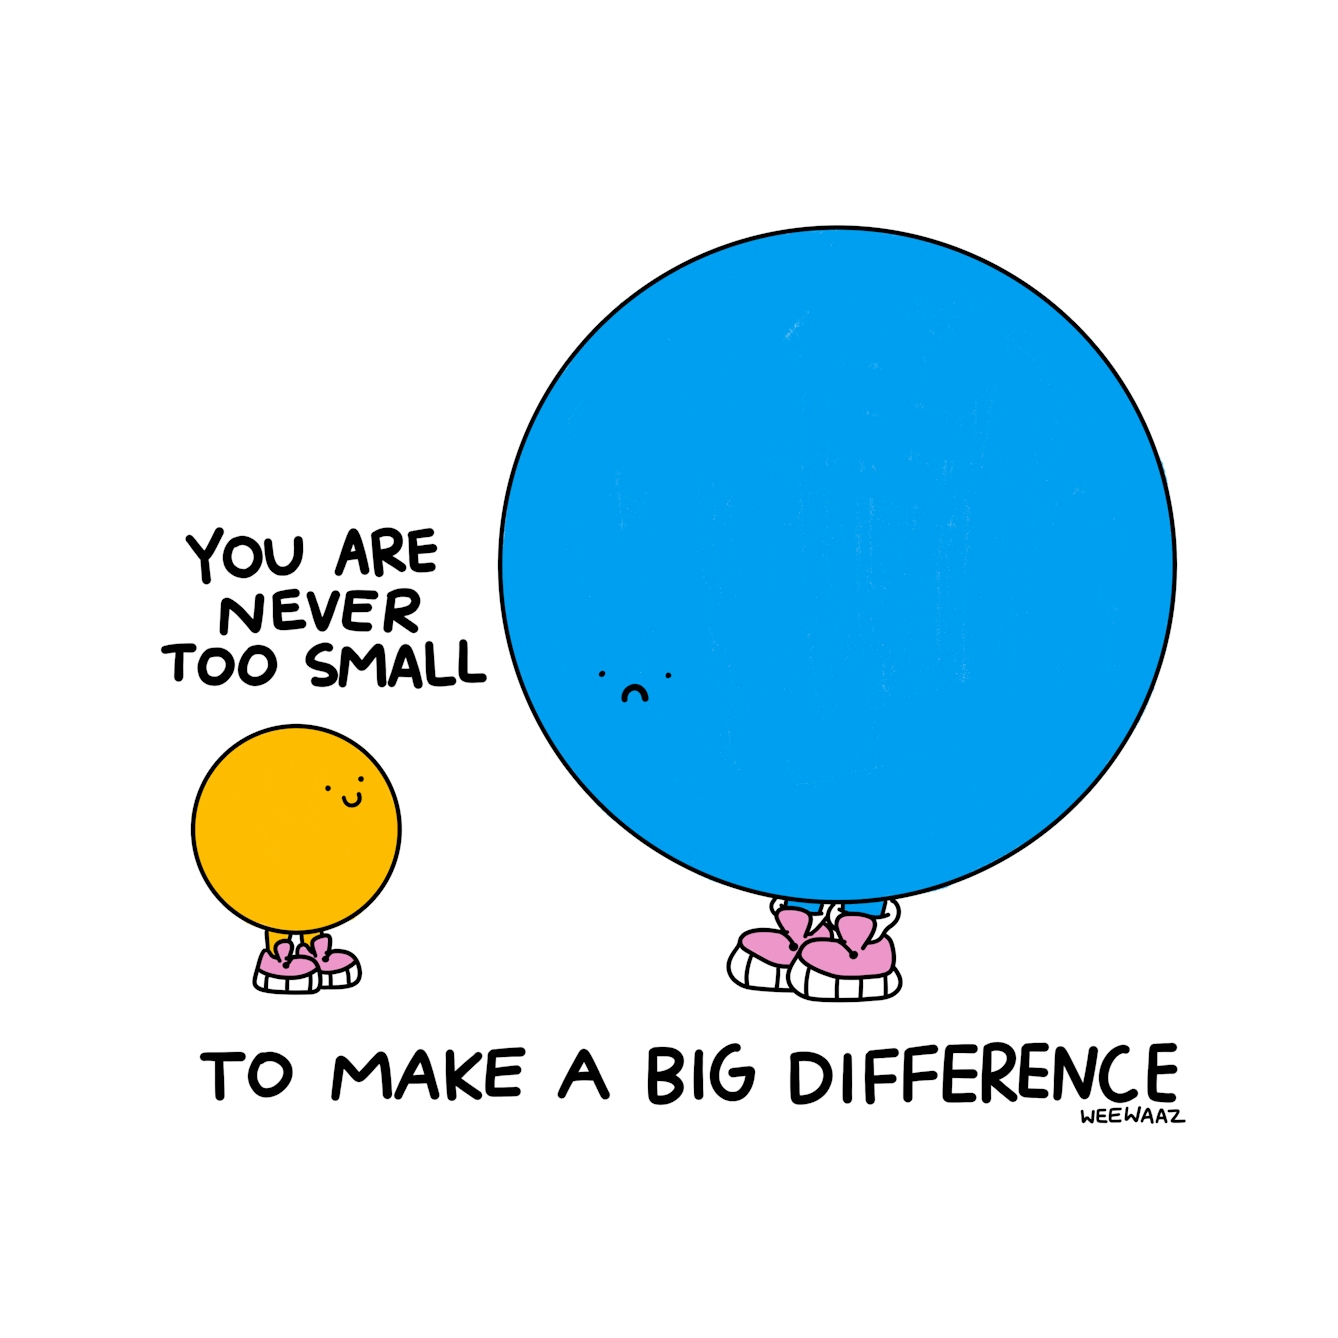 Big blue figure with a sad face and and small yellow figure with a smile. Text reads: You are never too small to make a big difference.